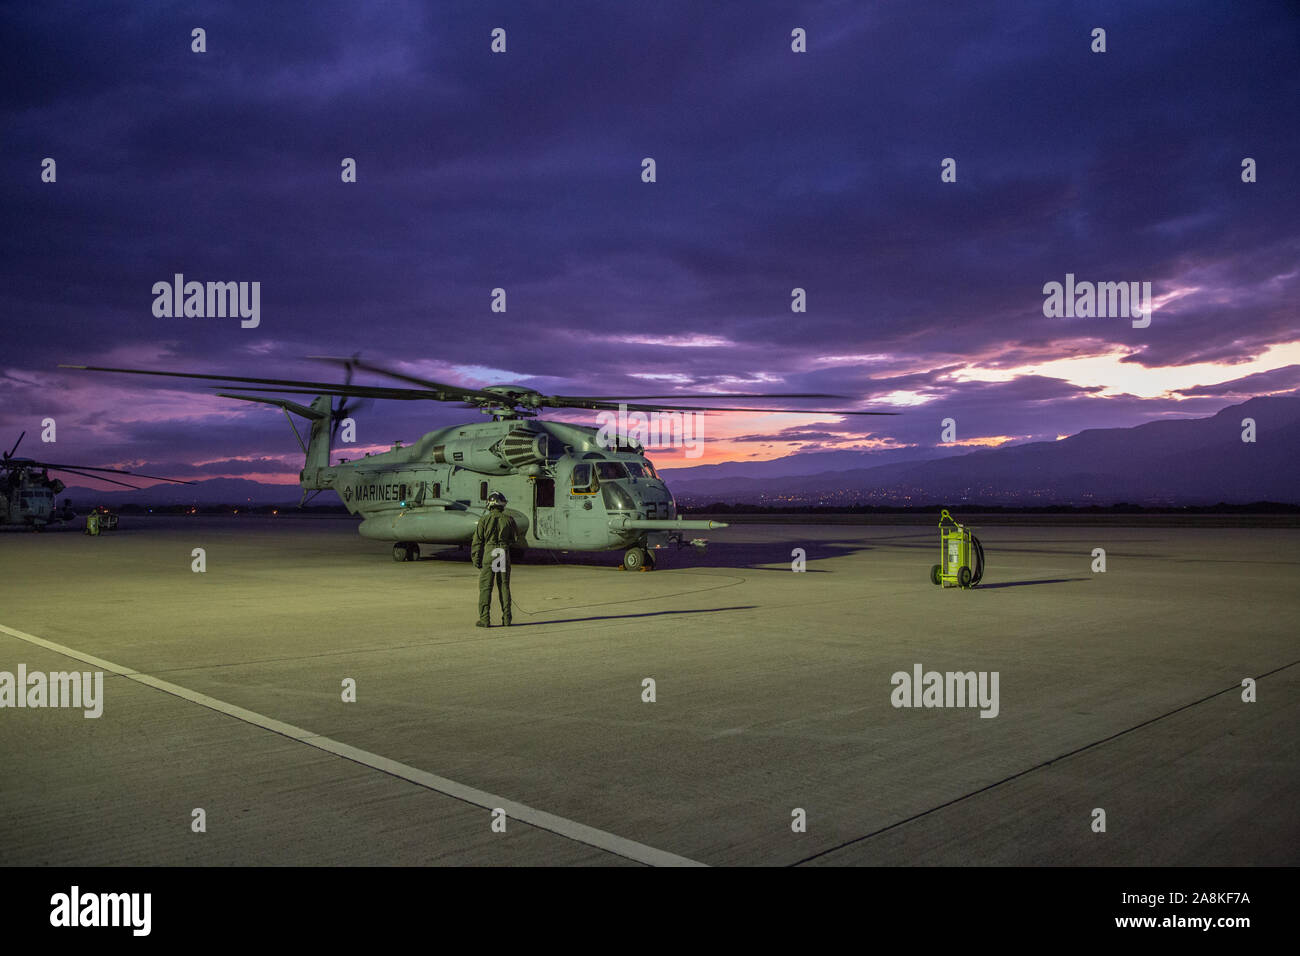 A U.S. Marine Corps CH-53E Super Stallion helicopter belonging to Special Purpose Marine Air-Ground Task Force - Southern Command shuts down on a flight line in Comayagua, Honduras, Nov. 7, 2019. The task force is conducting training and engineering projects hand-in-hand with partner nation military members in Latin America and the Caribbean during their deployment to the region, which coincides with hurricane season. (U.S. Marine Corps photo by Sgt. Stanley Moy) Stock Photo